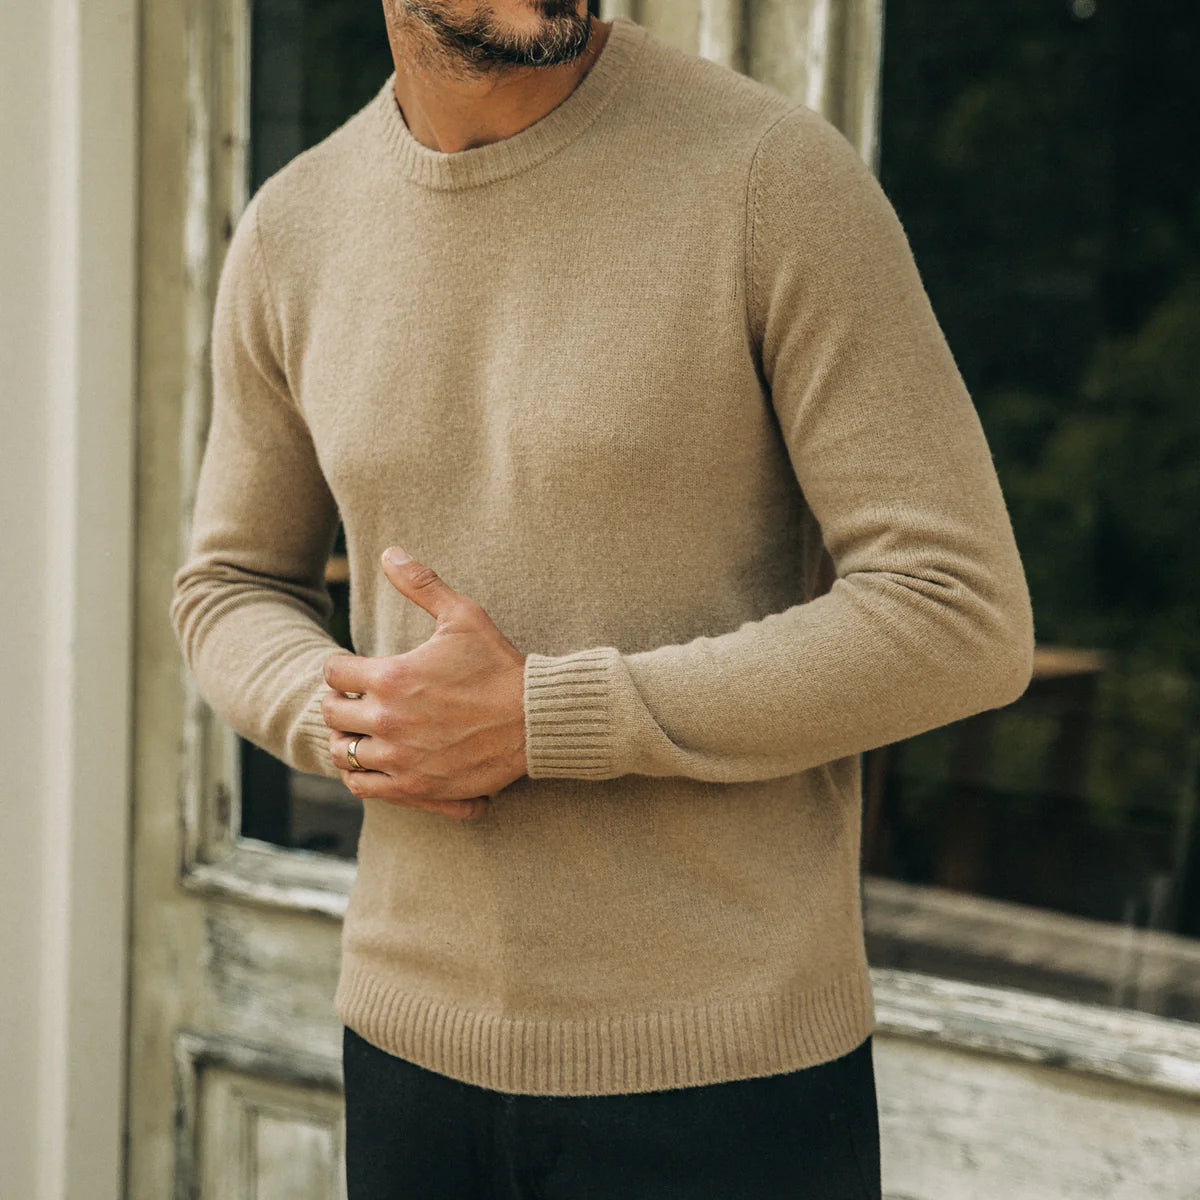 Taylor Stitch - The Lodge Sweater in Camel